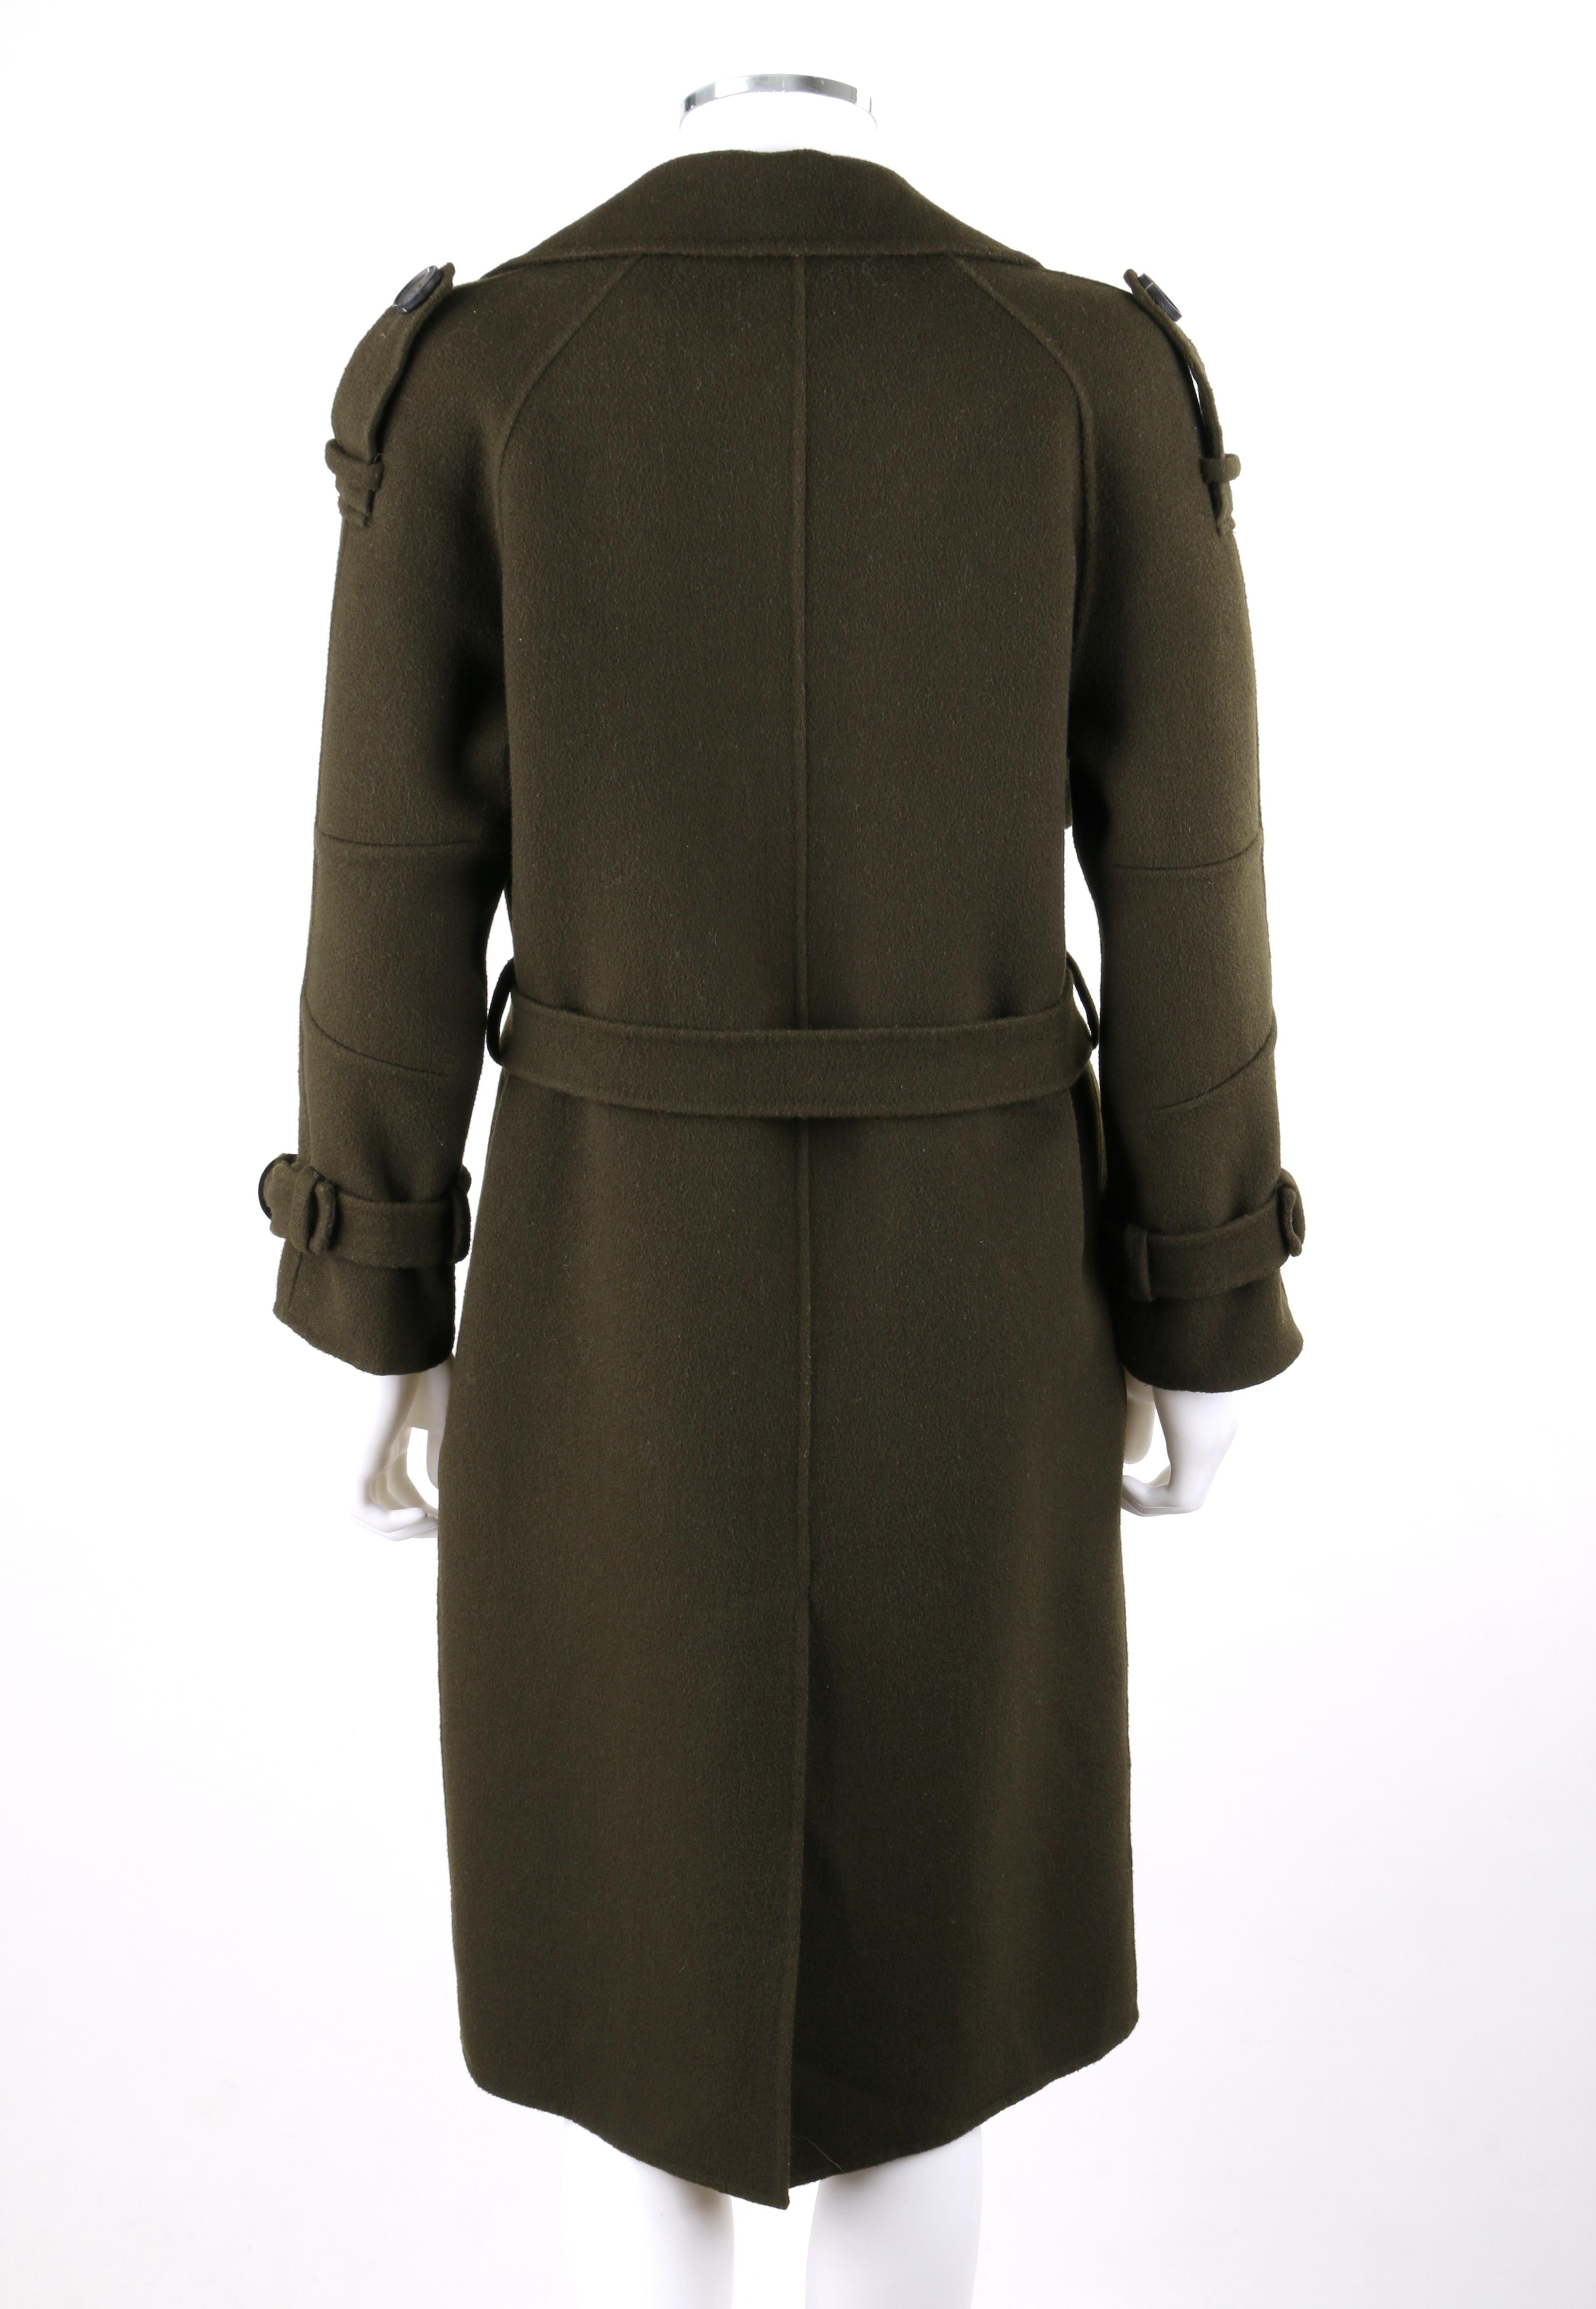 Women's GIORGIO ARMANI Army Green Double Breasted Cashmere Military Belted Jacket Coat